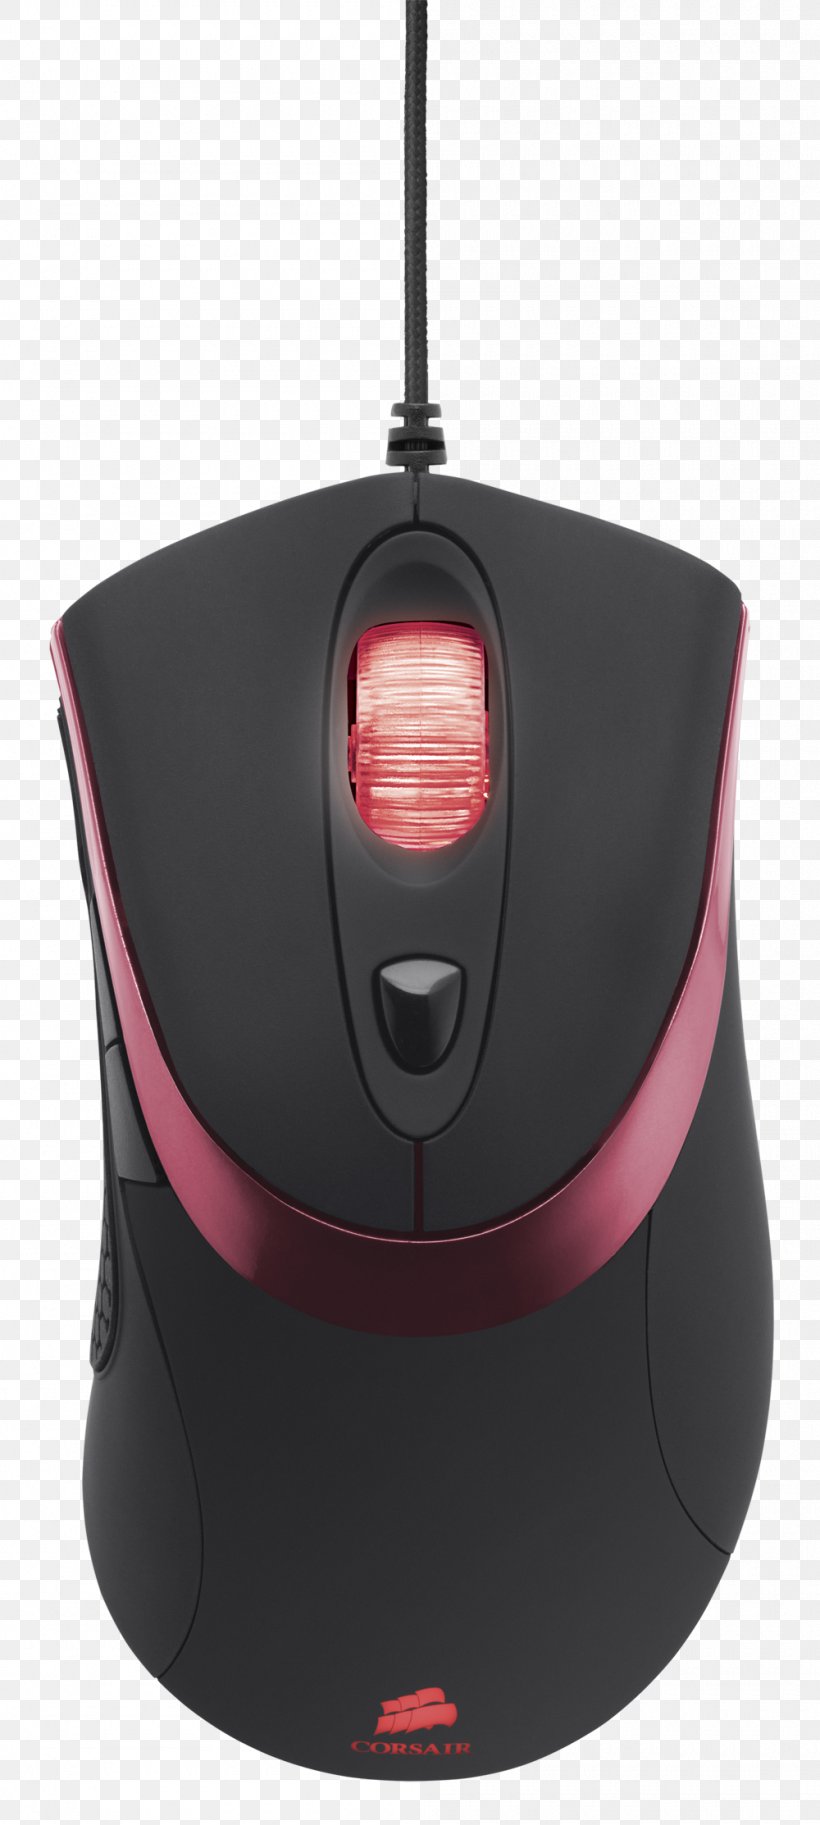 Computer Mouse Corsair Raptor M30 Computer Keyboard Corsair Components Peripheral, PNG, 1000x2226px, Computer Mouse, Computer, Computer Component, Computer Keyboard, Corsair Components Download Free